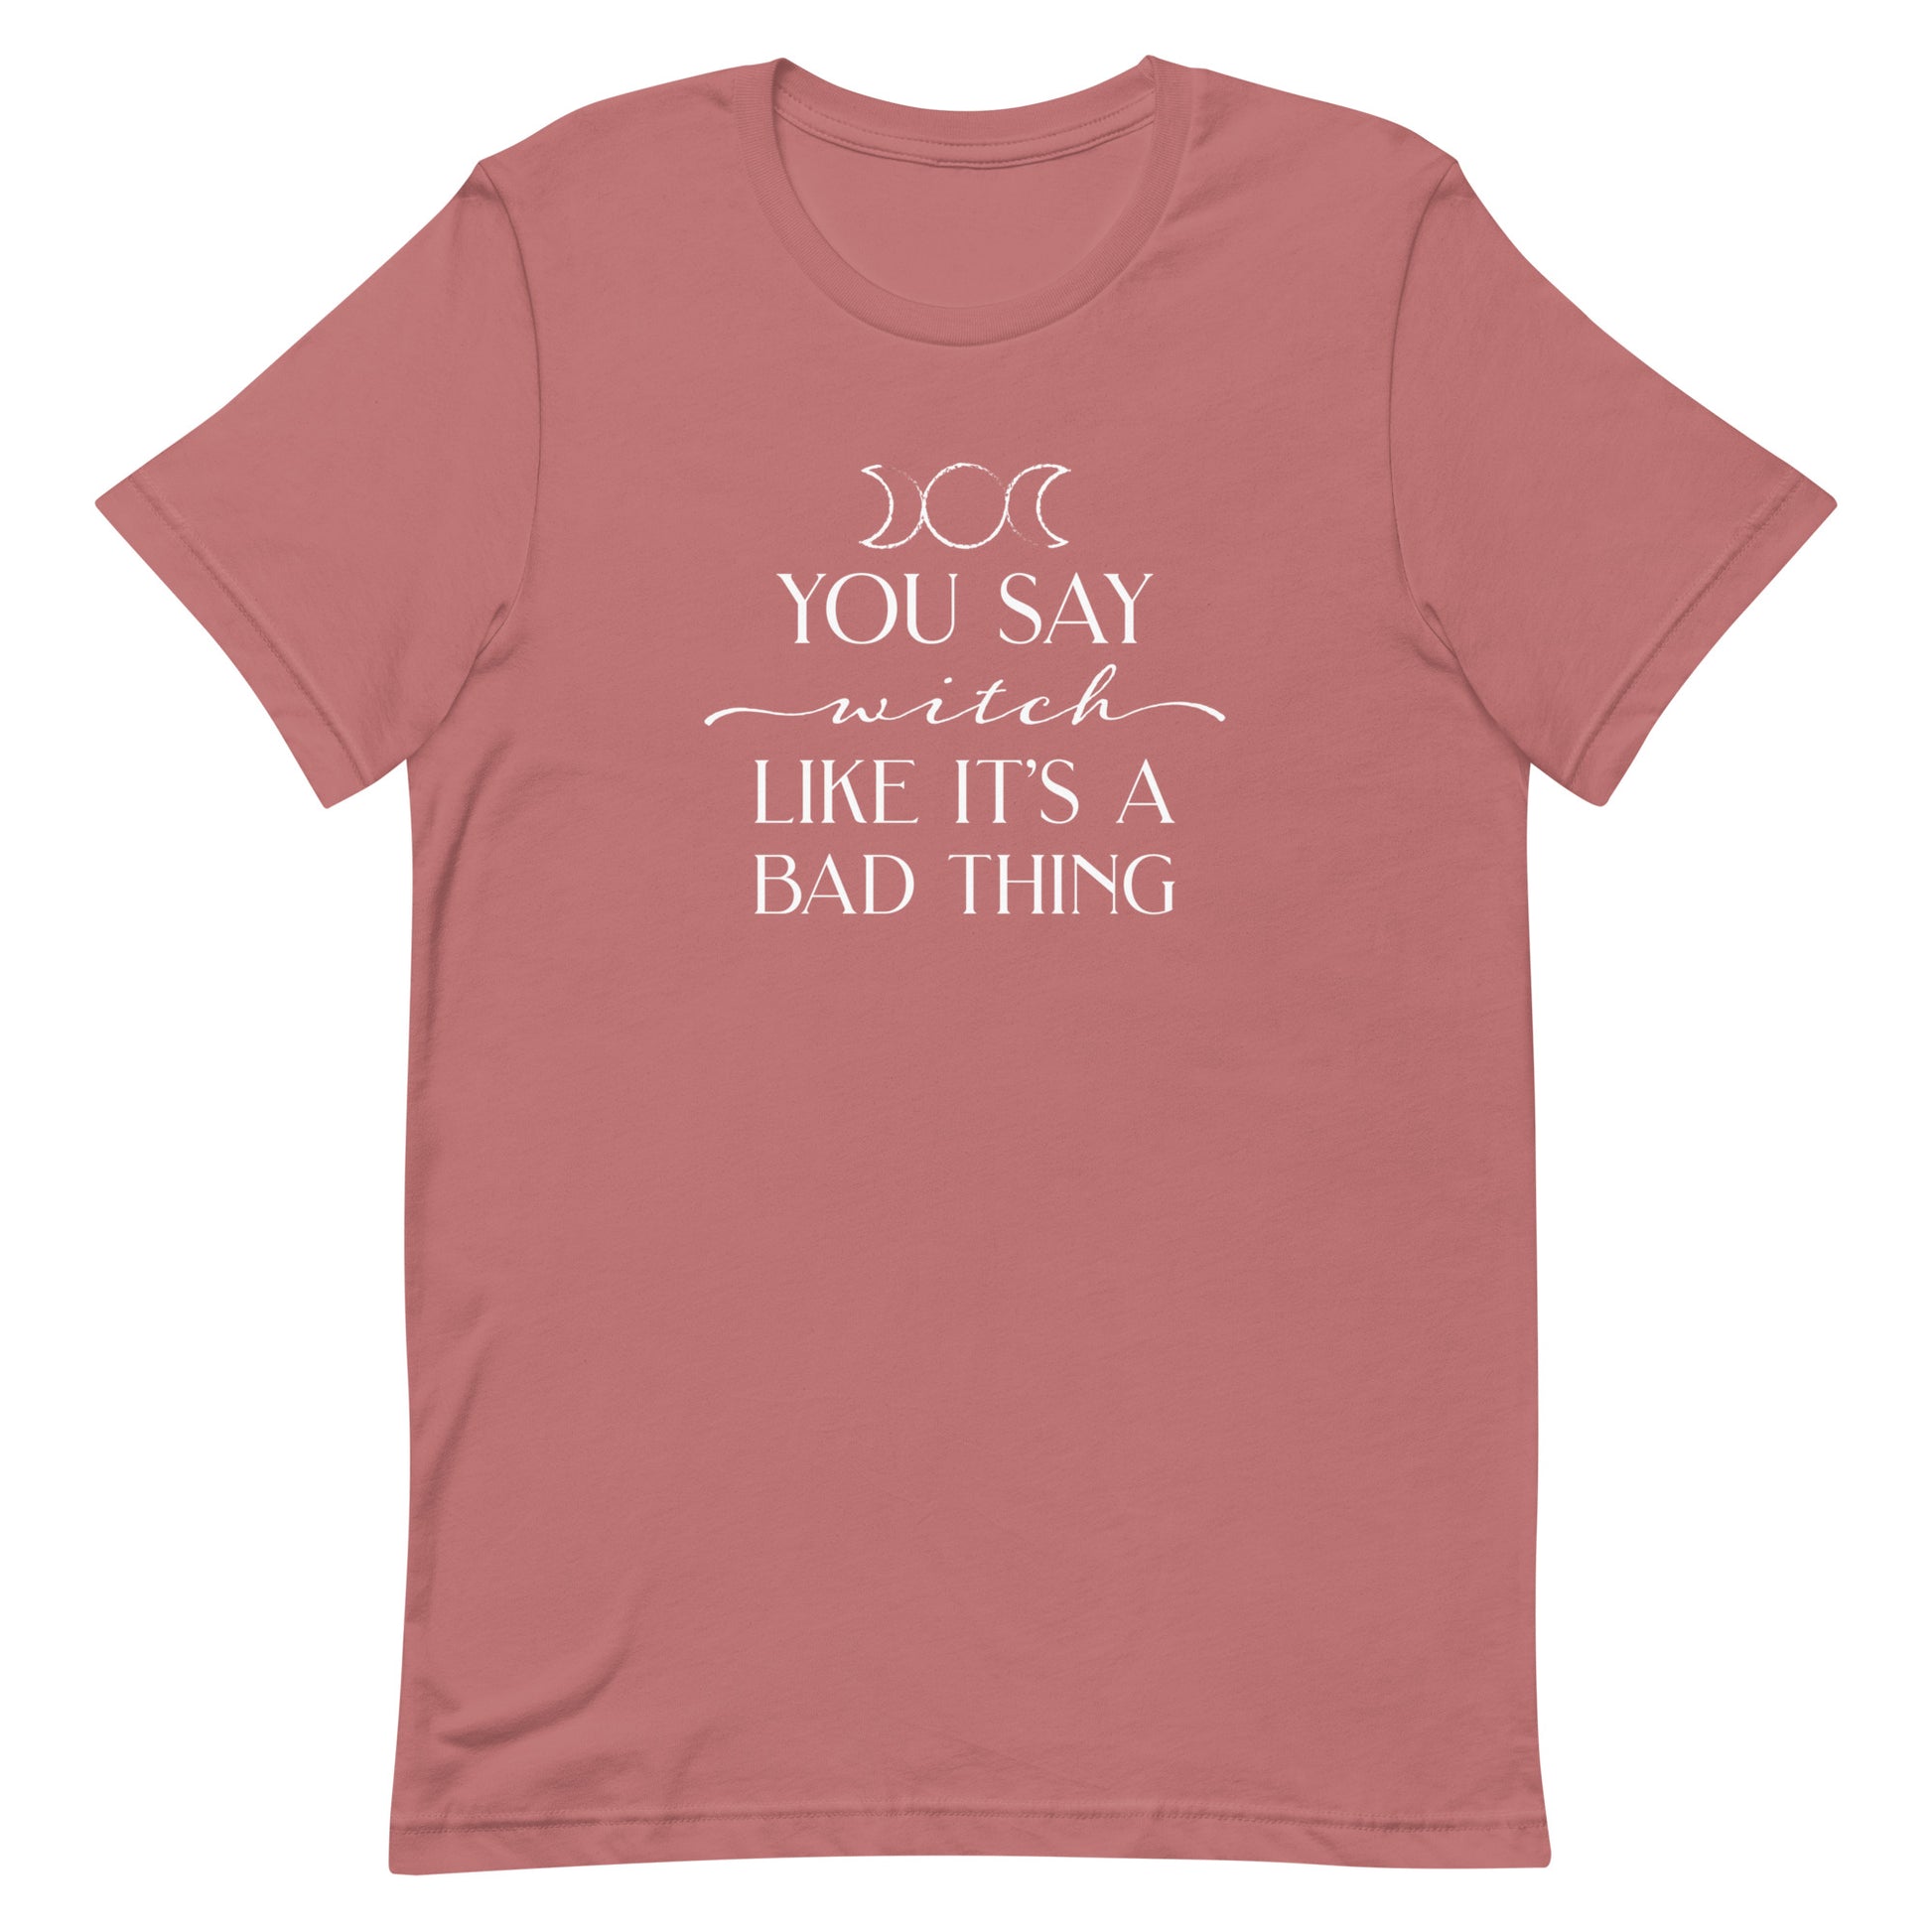 A light mauve crewneck t-shirt featuring the triple goddess symbol and text reading "You say witch like it's a bad thing"